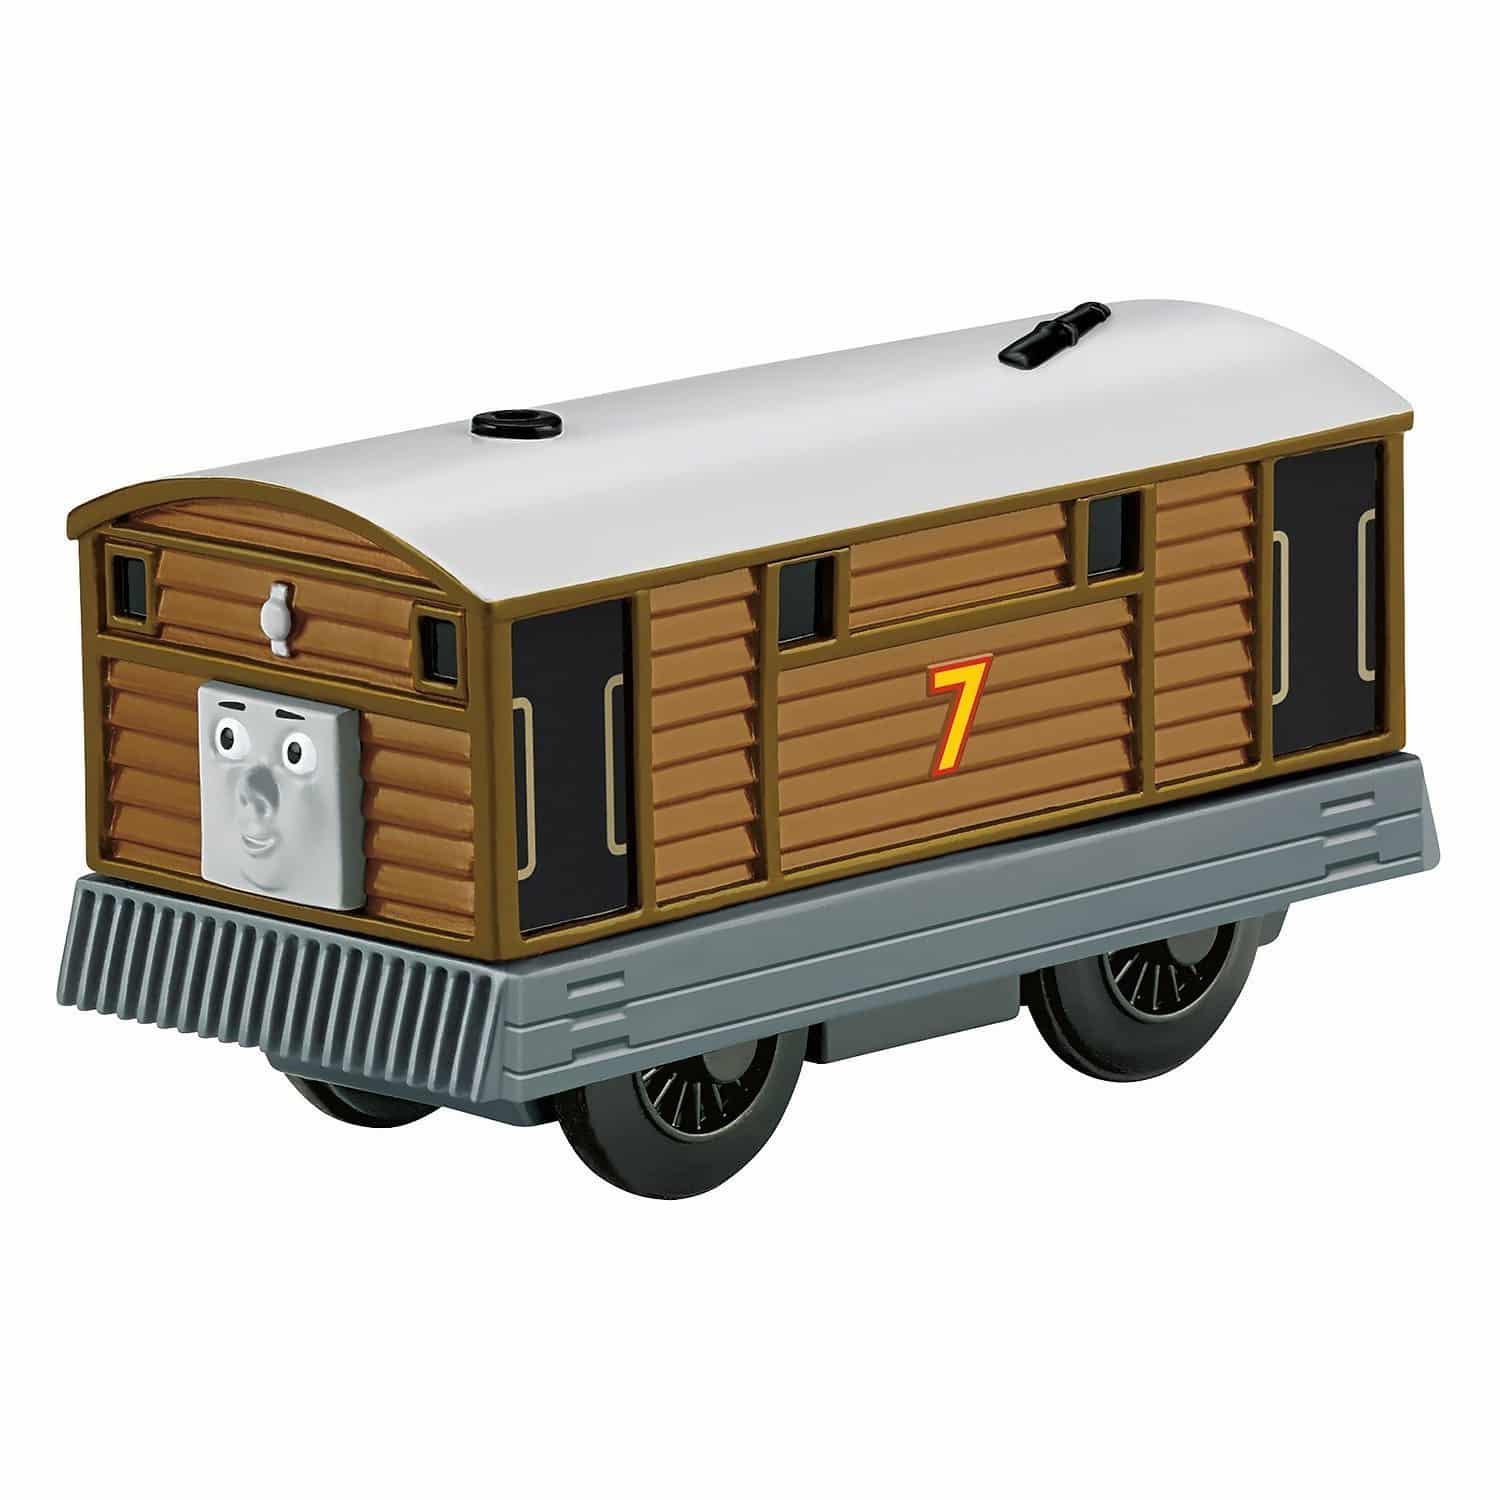 Thomas & Friends - Wooden Railway - Battery Operated Toby